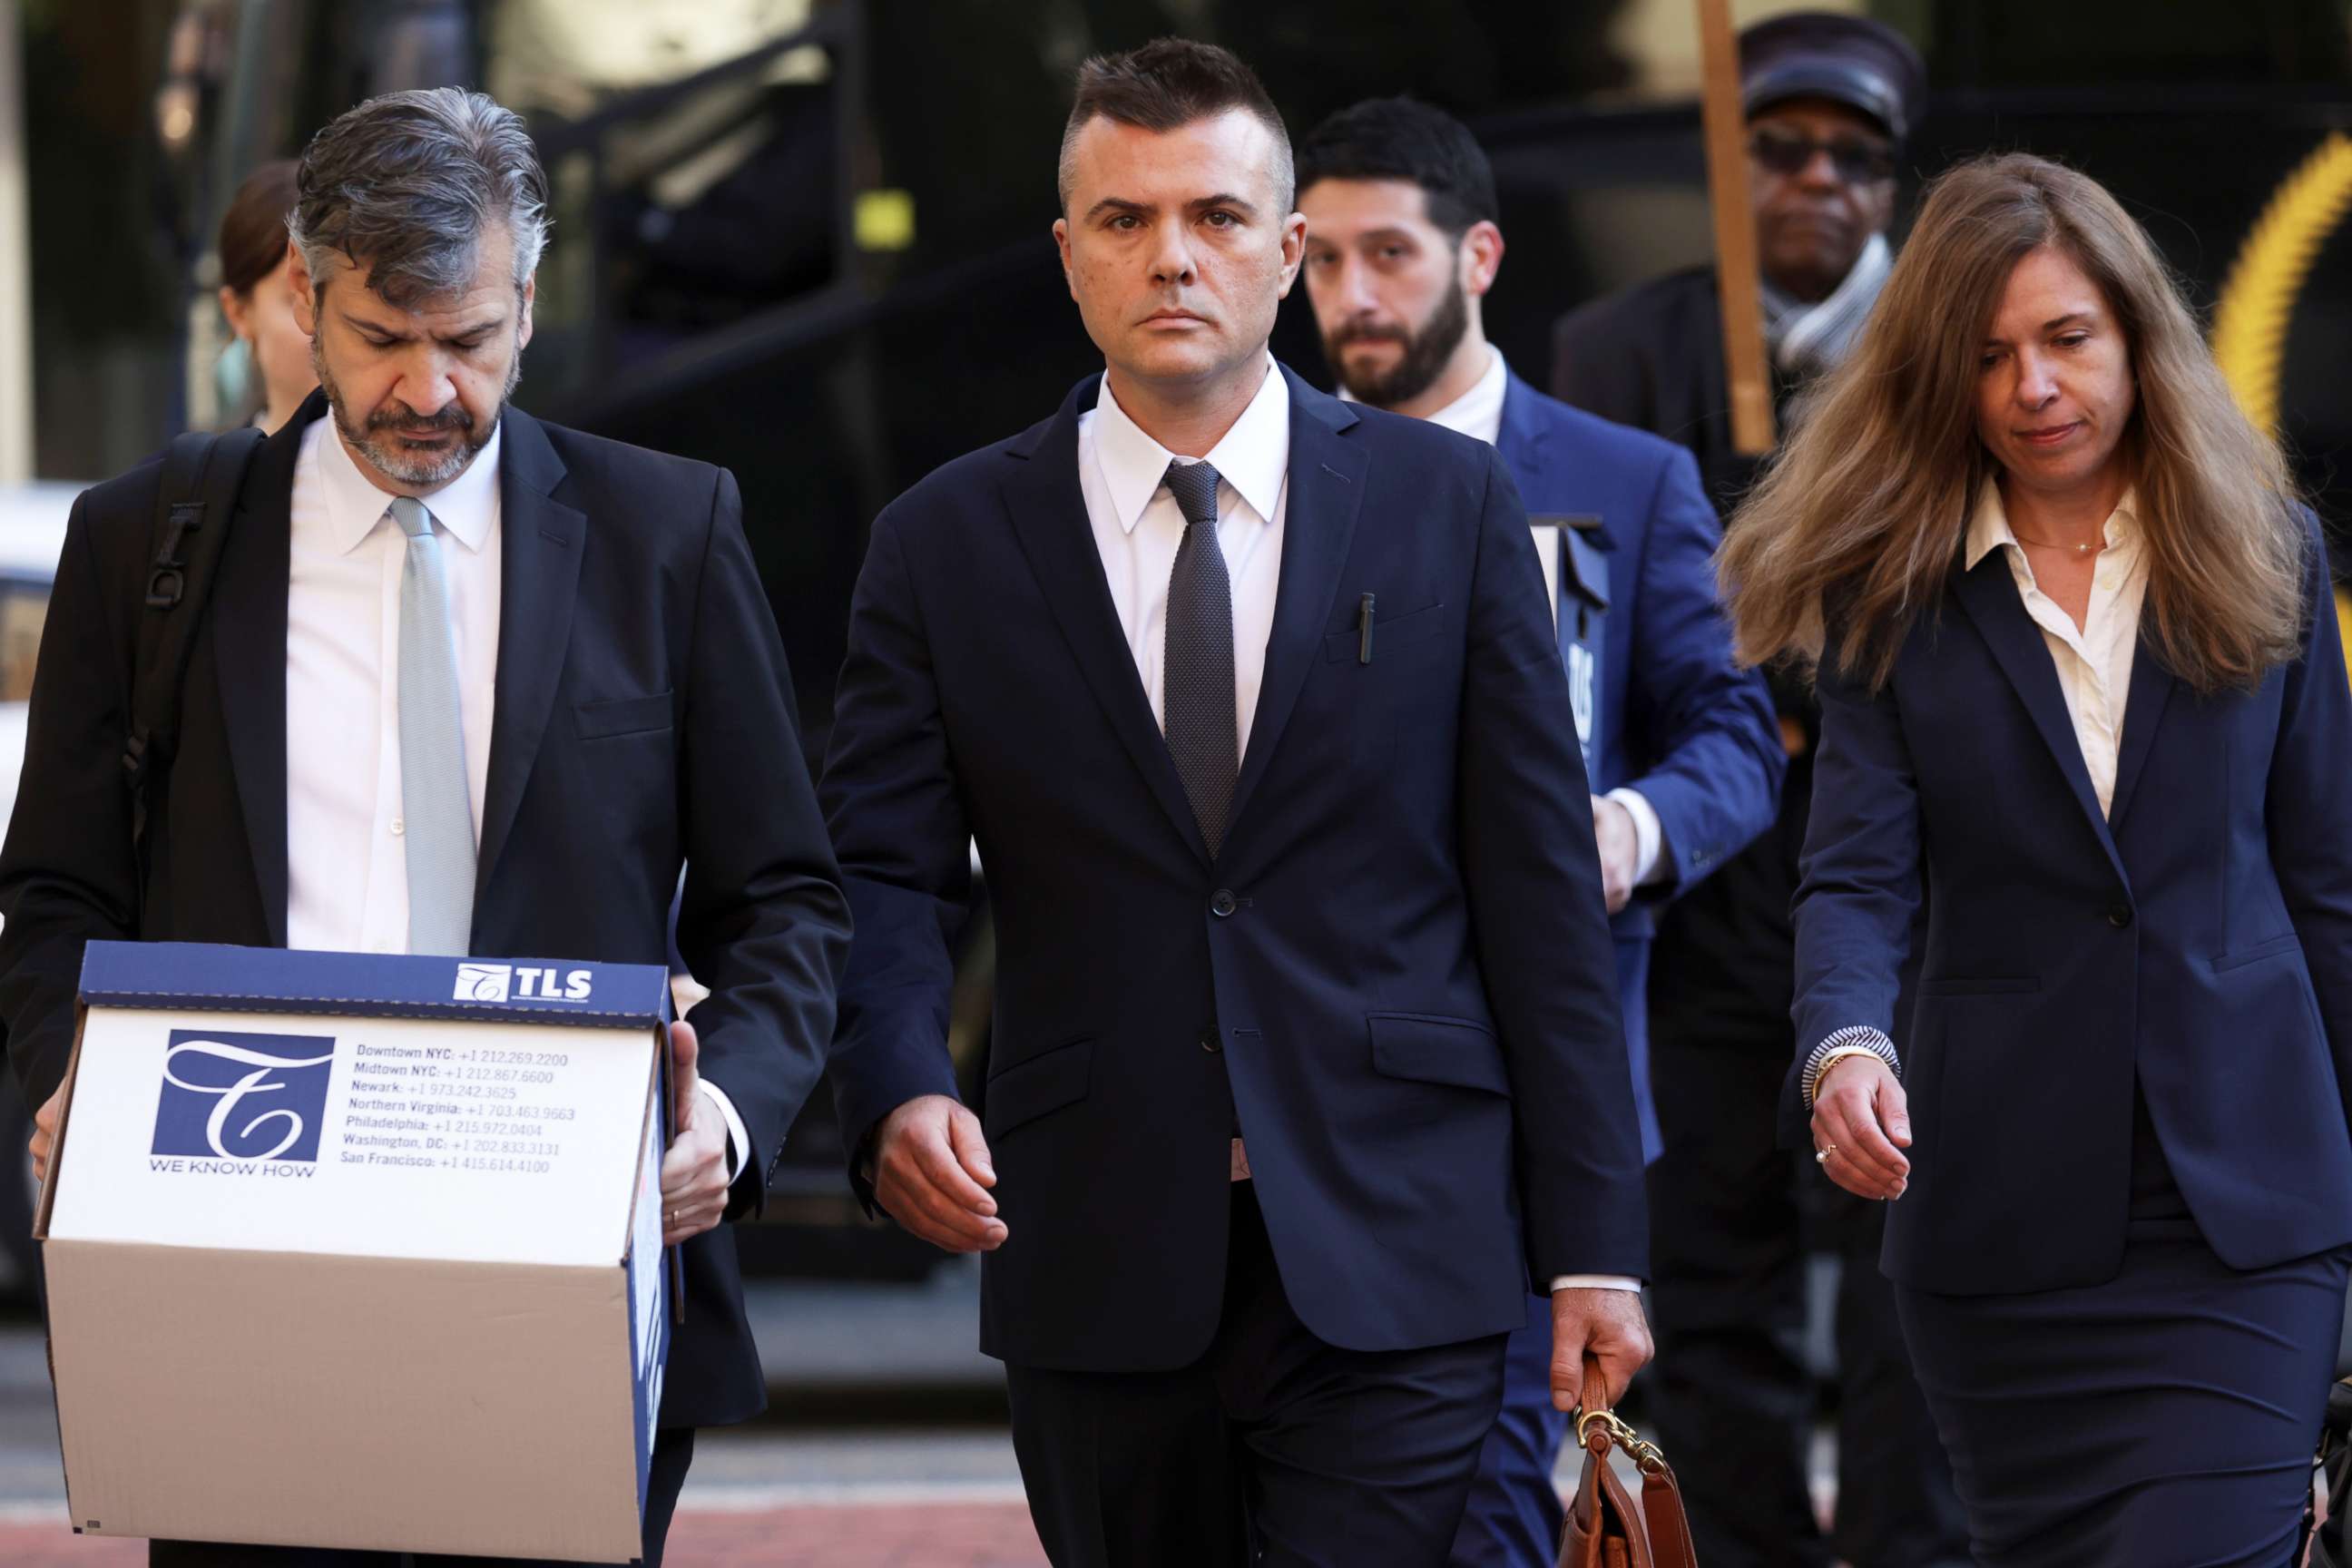 PHOTO: Russian analyst Igor Danchenko, center, arrives at the Albert V. Bryan U.S. Courthouse for his trial on Oct. 11, 2022 in Alexandria, Virginia. 